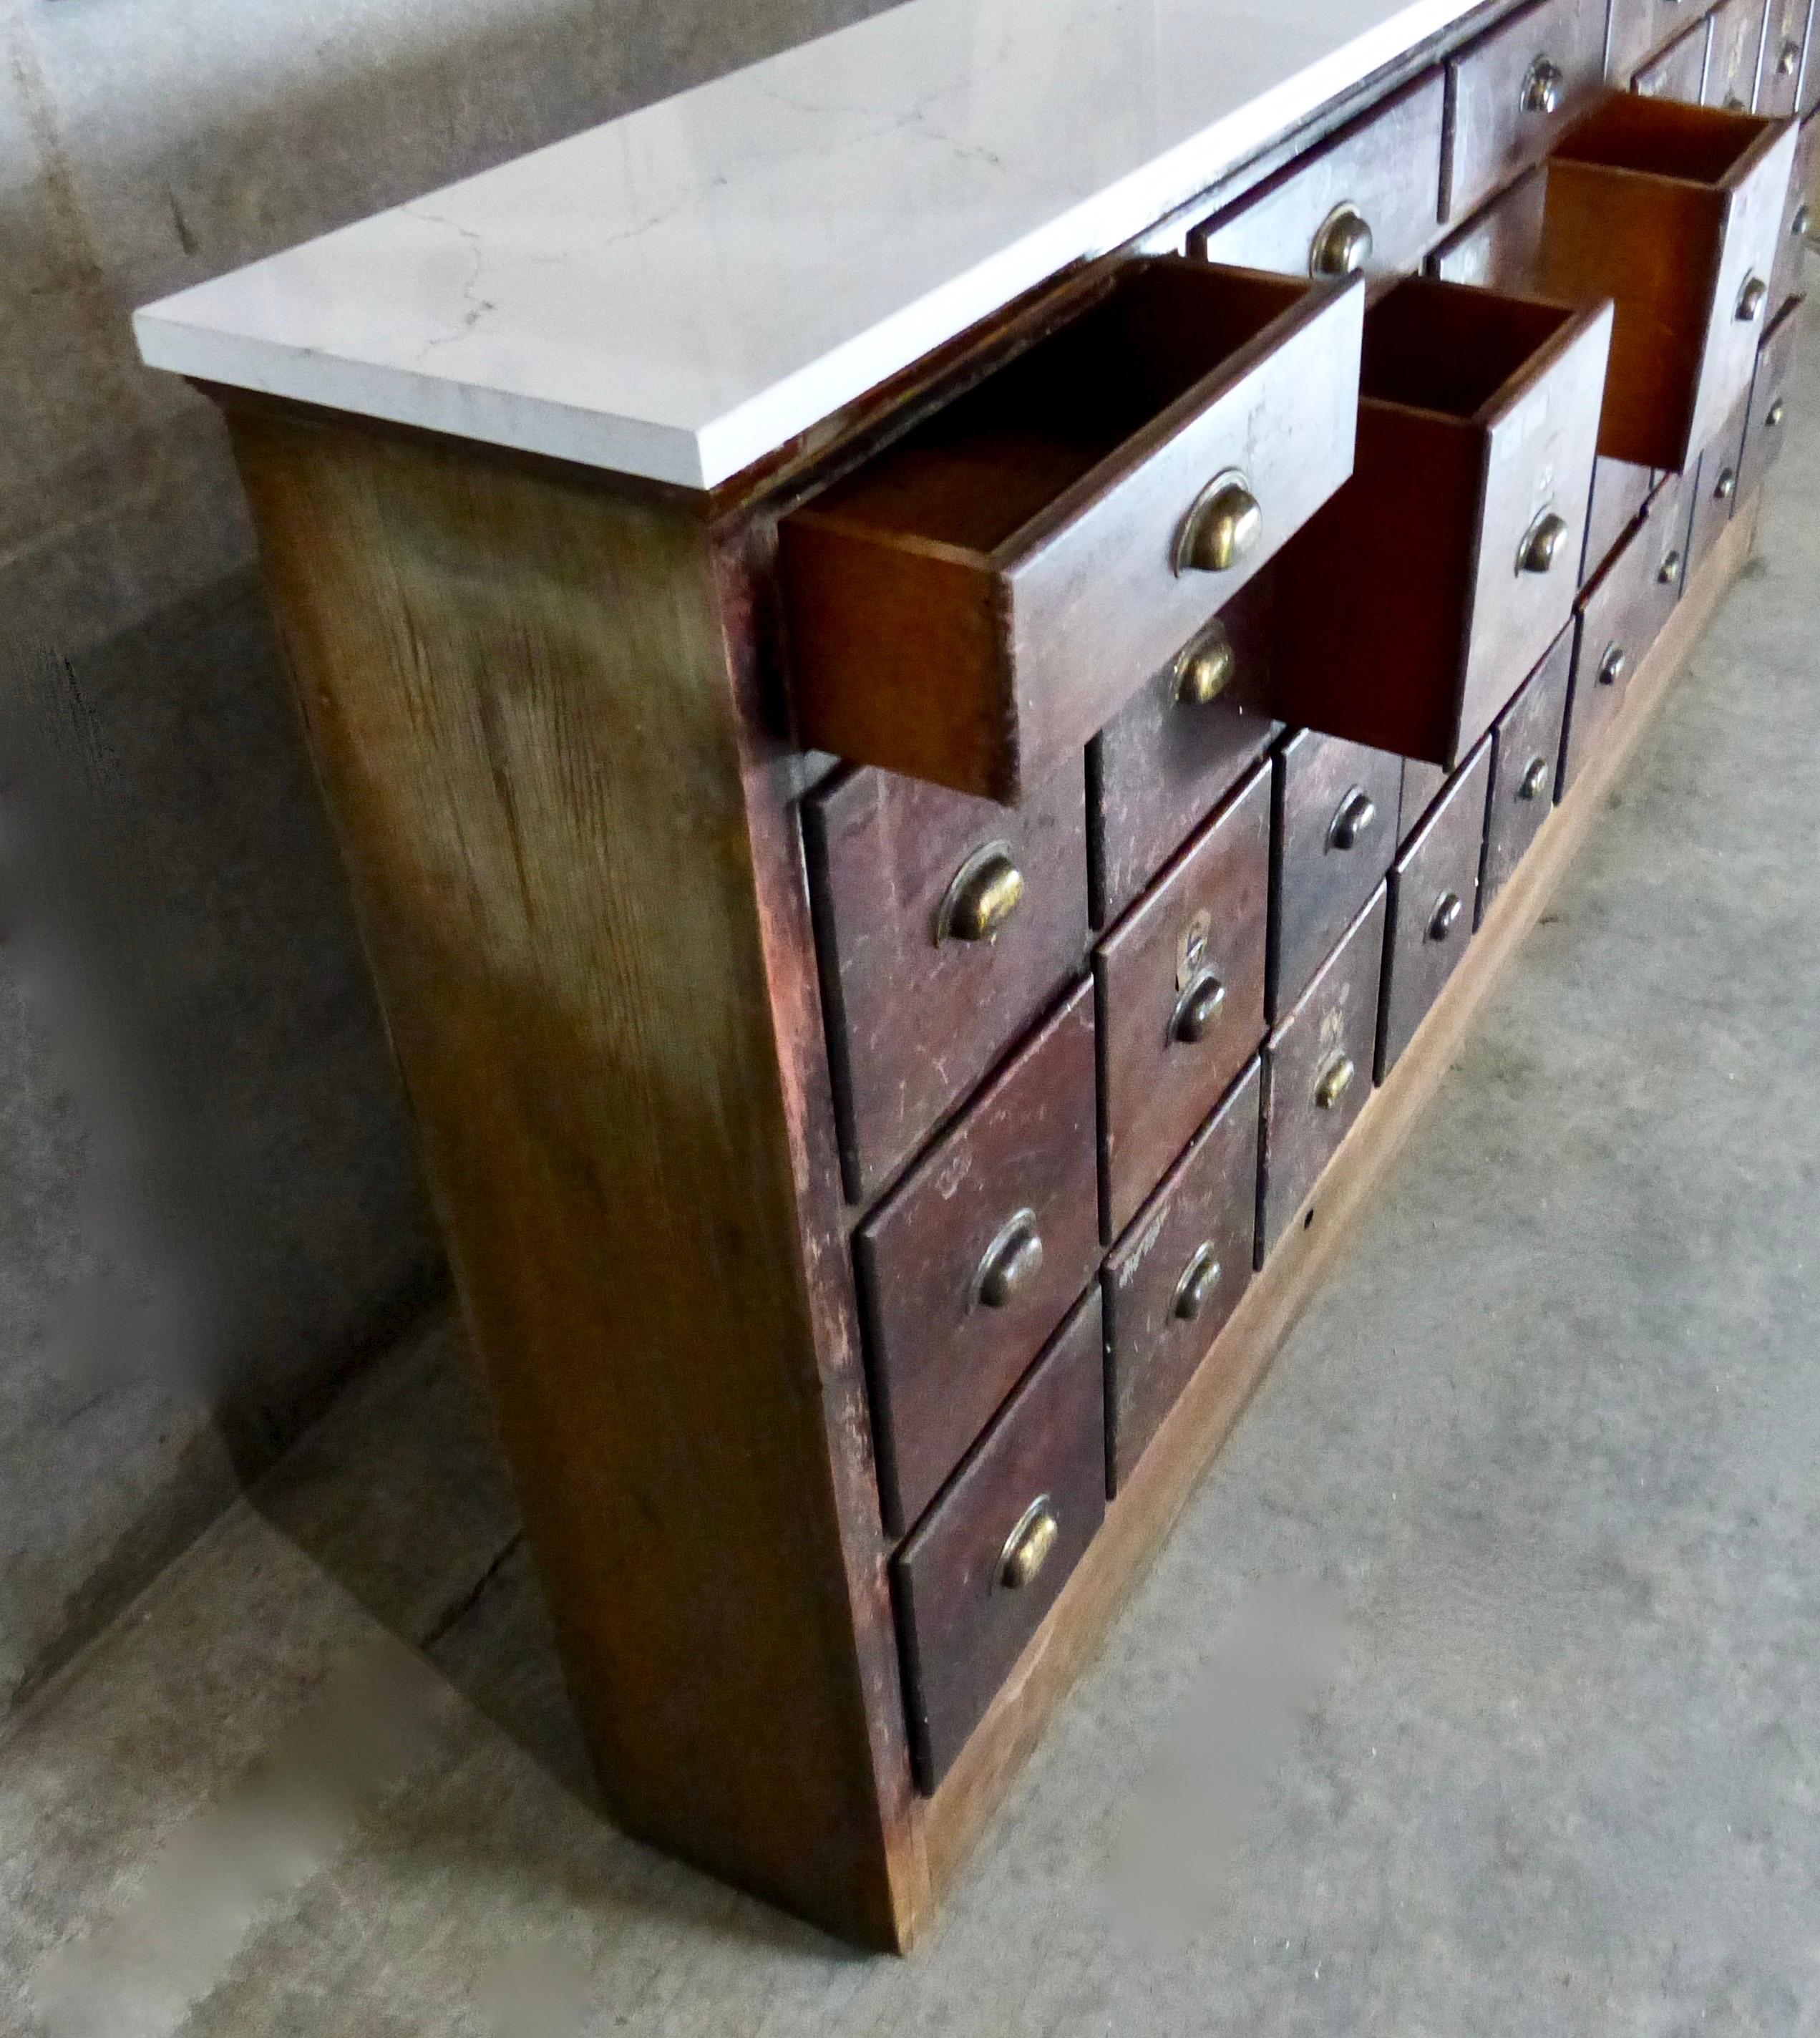 A multi-drawer, solid wood apothecary/hardware cabinet from circa 1910. Features include six flat drawers and 27 square drawers, marble top, and original brass hardware. The cabinet’s narrow depth makes it suitable for tight spaces like hallways or